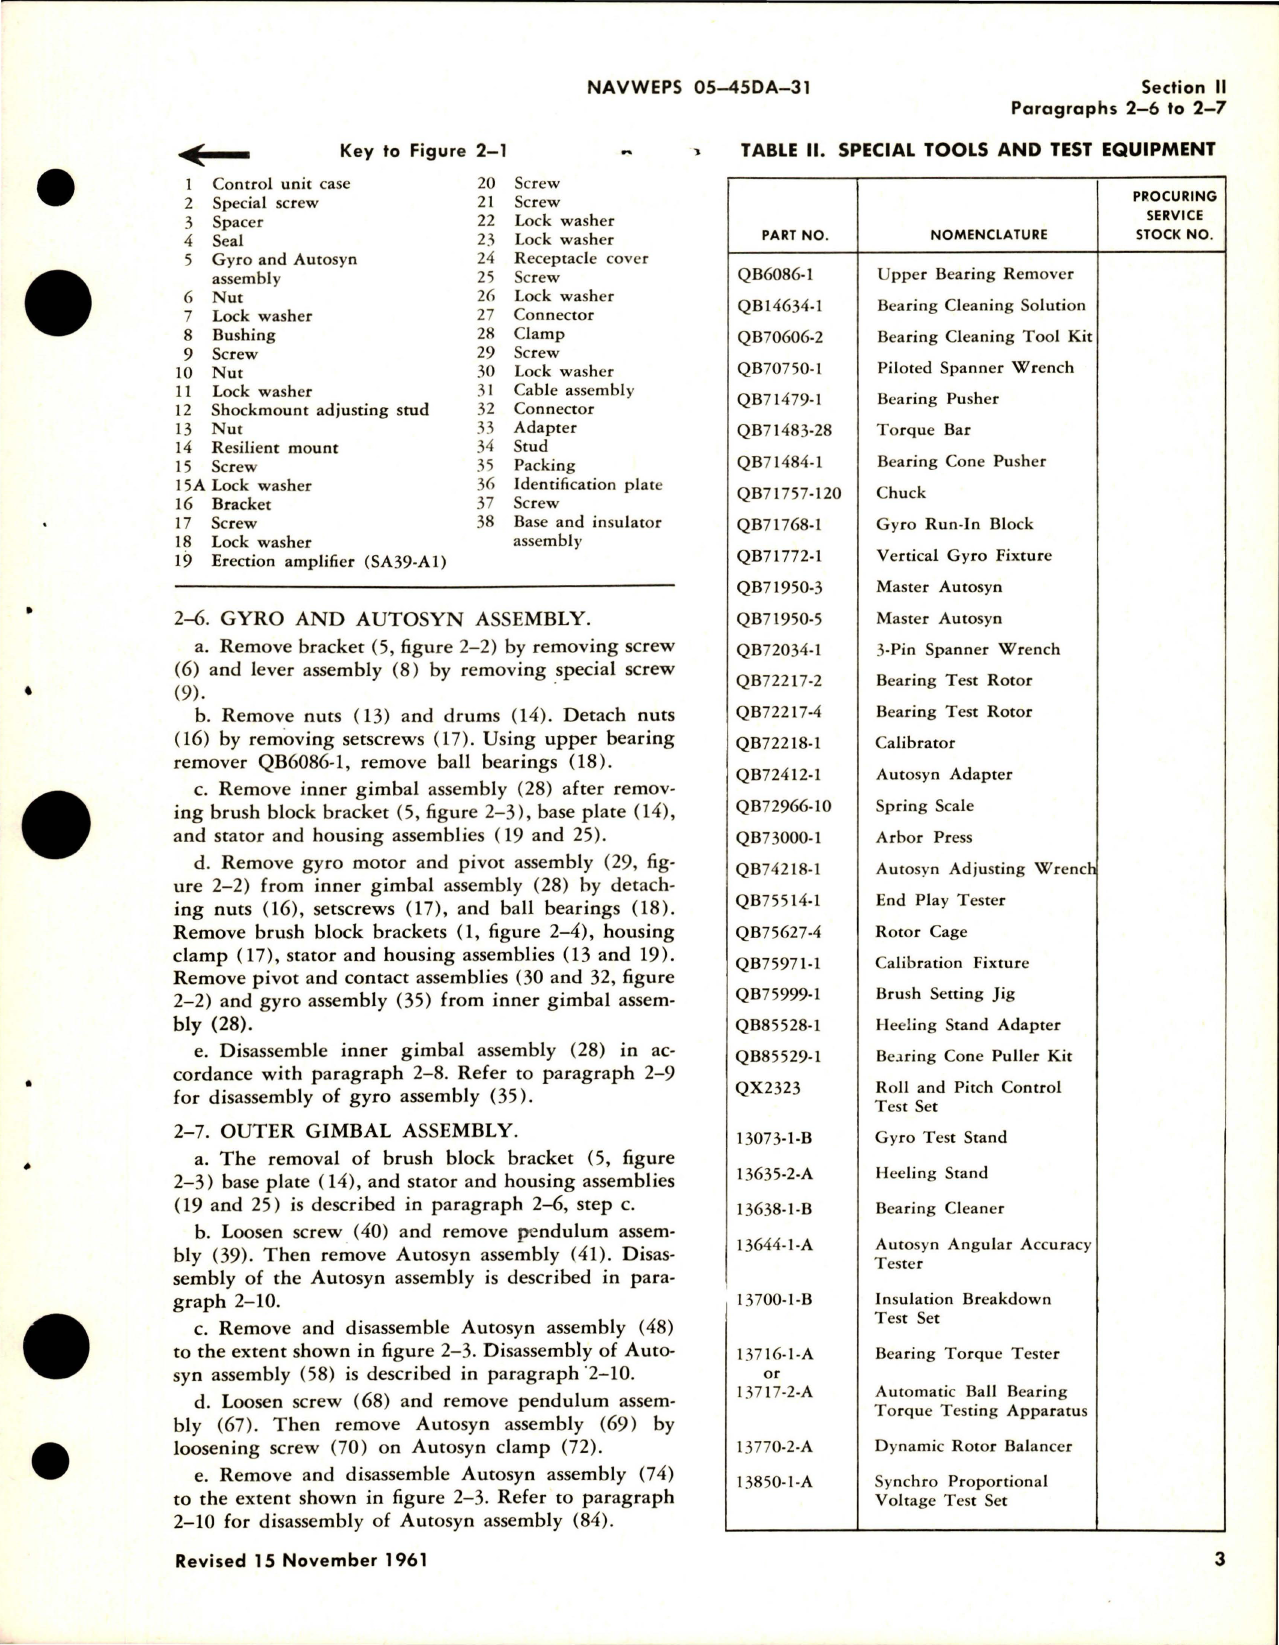 Sample page 5 from AirCorps Library document: Overhaul Instructions for Automatic Pilot Roll and Pitch Control - Part 15836-1-A